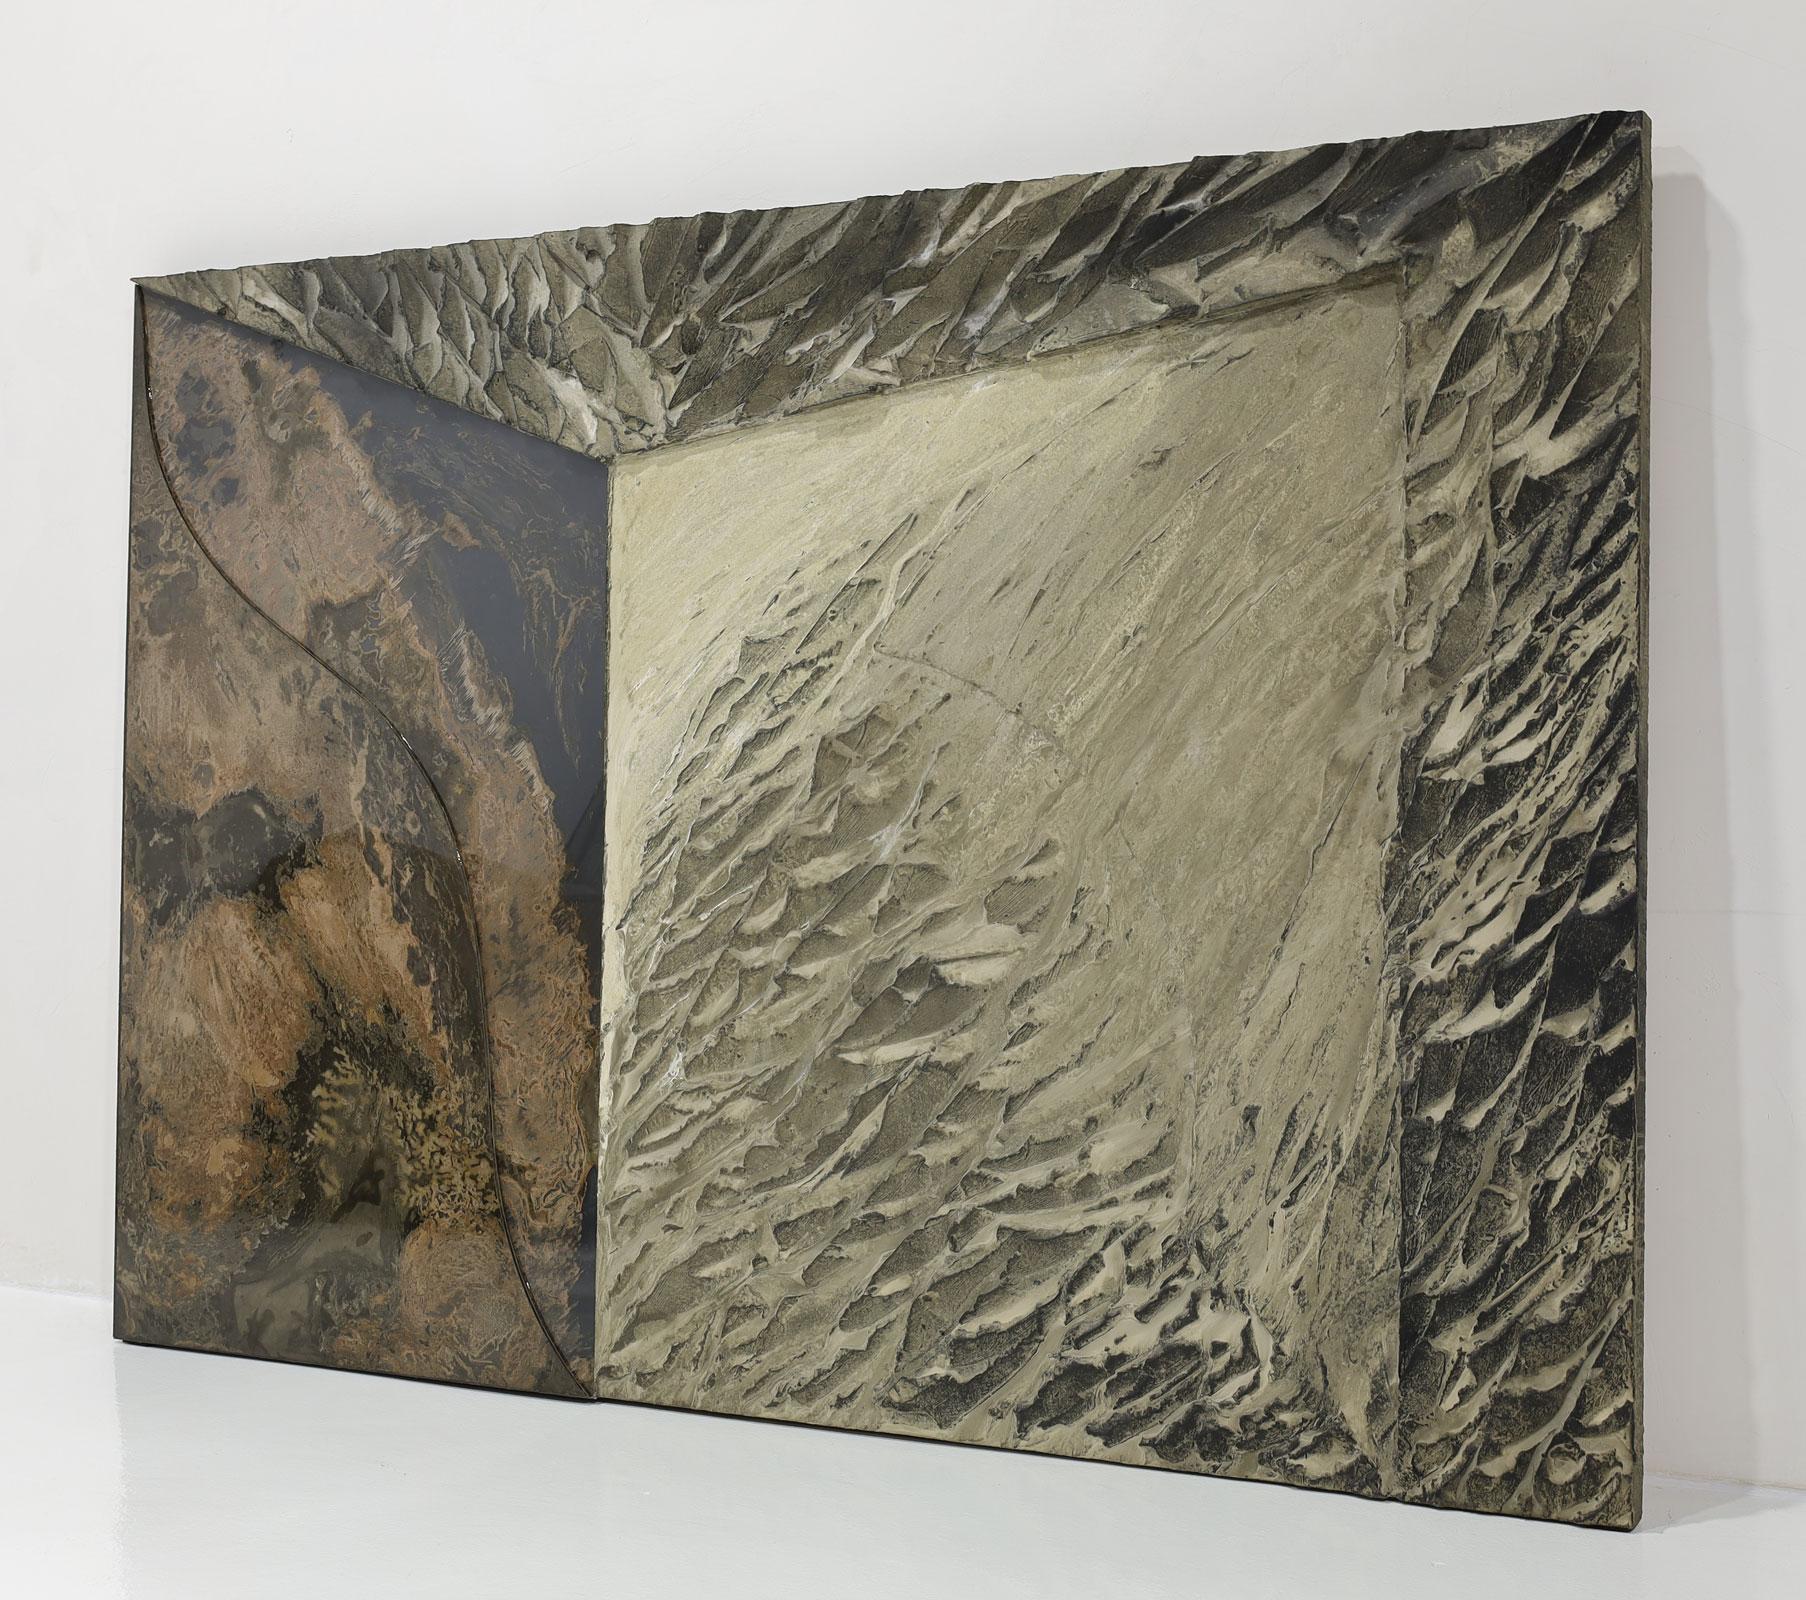 A beautiful large scale work of art by Laddie John Dill.  Work is composed of cement, glass, wood and pigment applied to canvas. Signed and dated verso.
From the artist's website:
Laddie John Dill, a Los Angeles artist, had his first solo exhibition